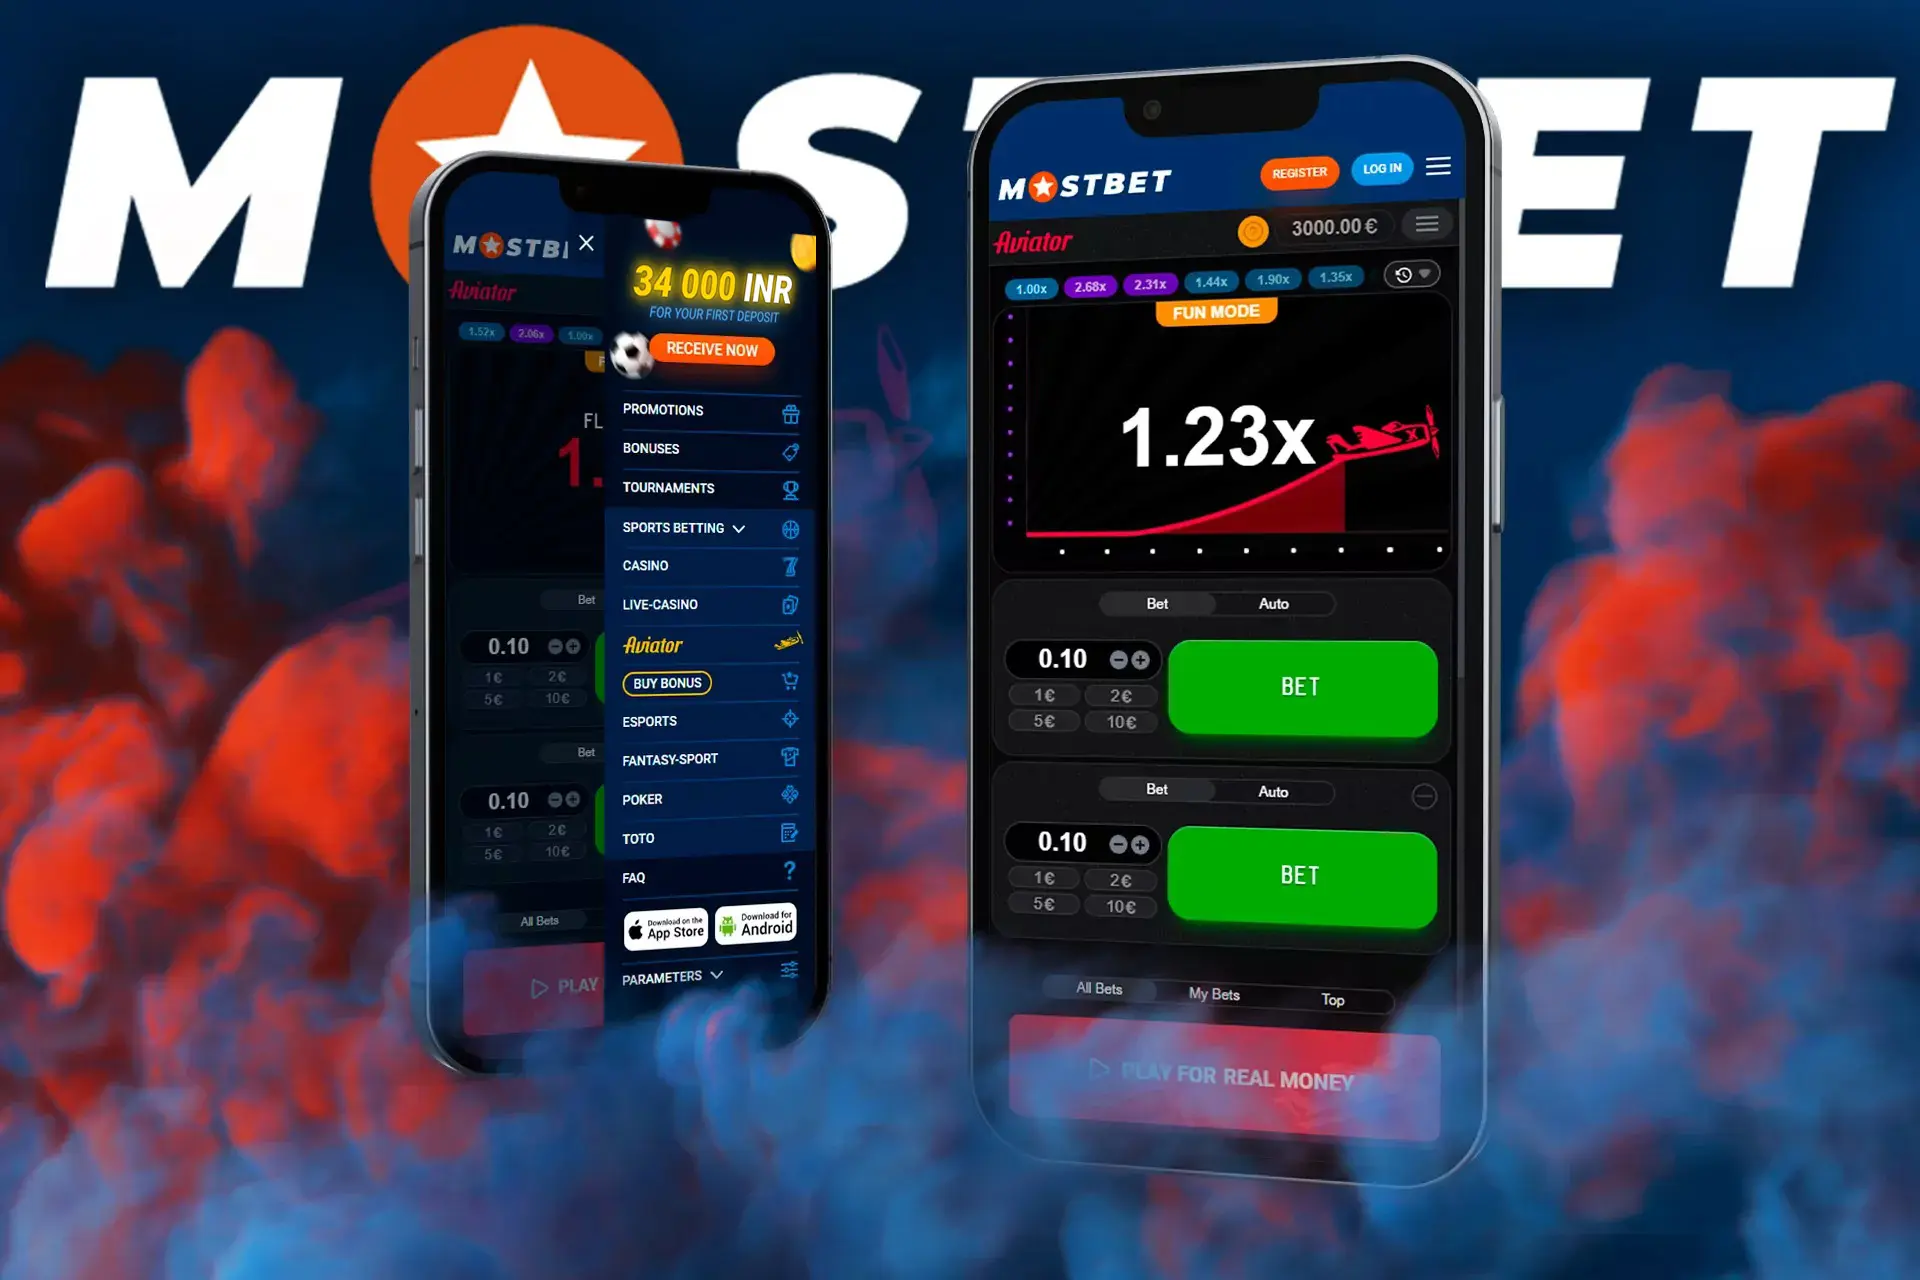 3 More Cool Tools For Mostbet-AZ 45 bookmaker and casino in Azerbaijan